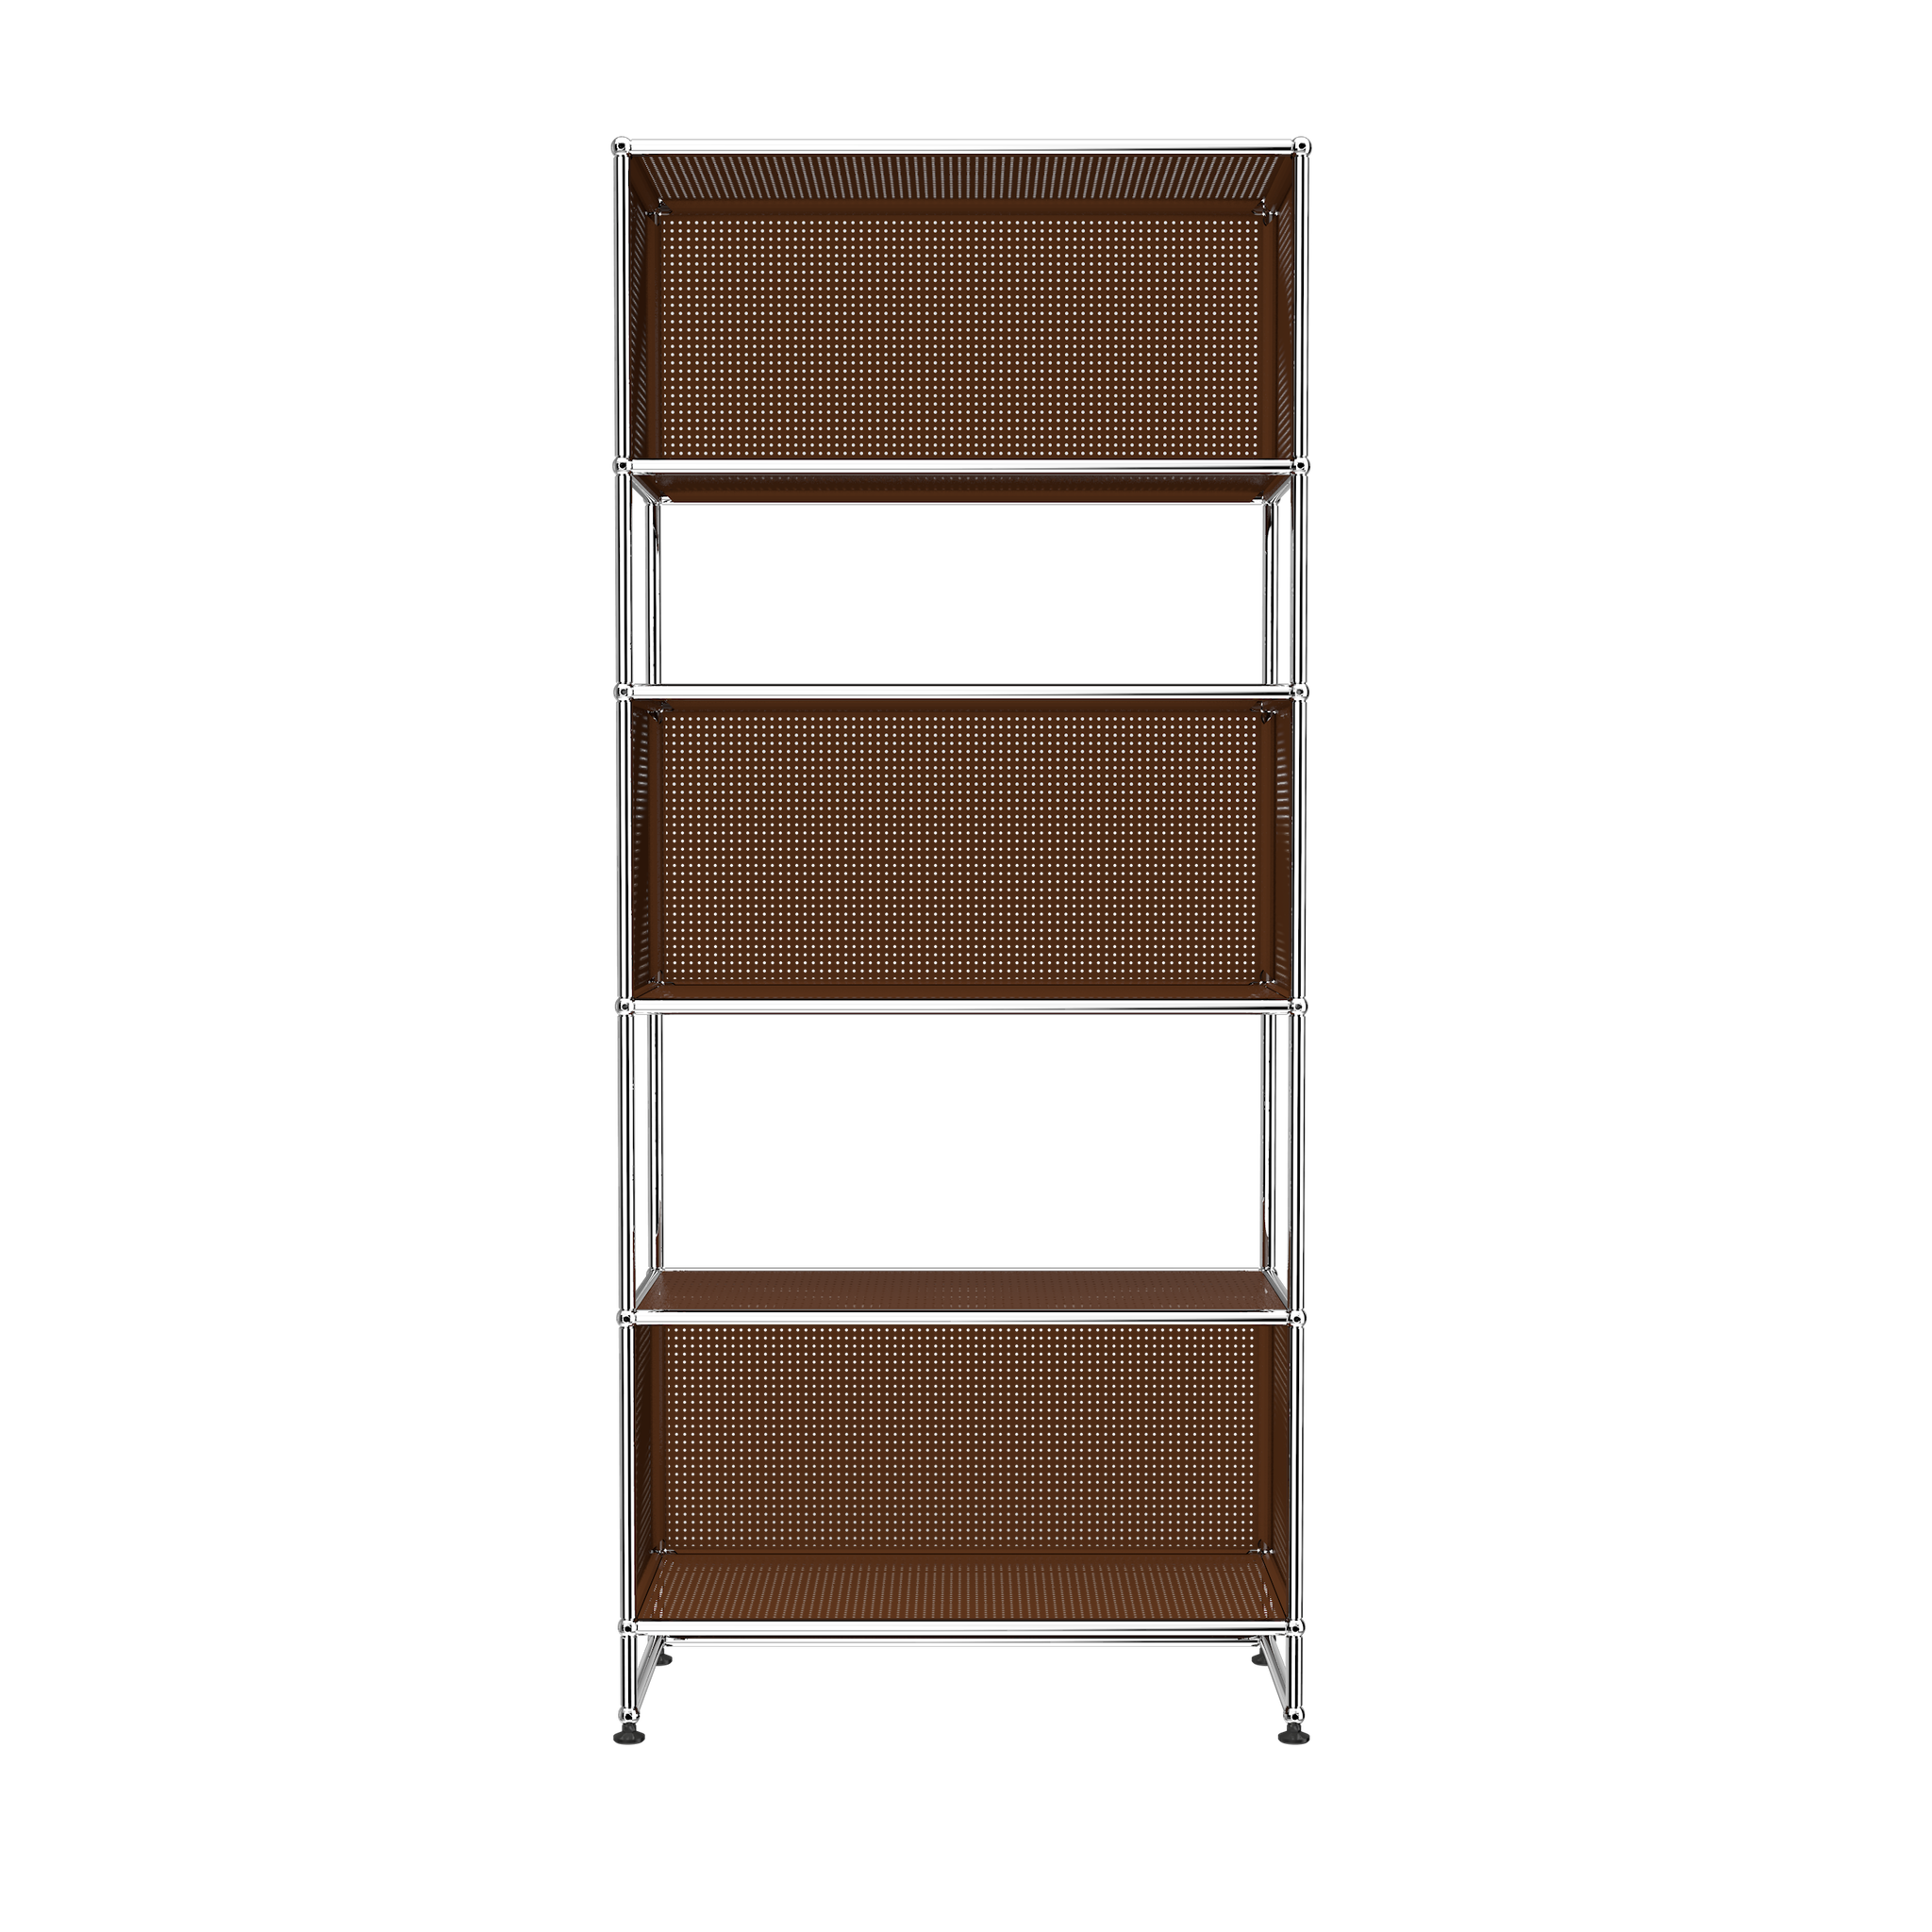 USM Haller 3 Box Shelving with Perforated Panels (RE119) in Brown